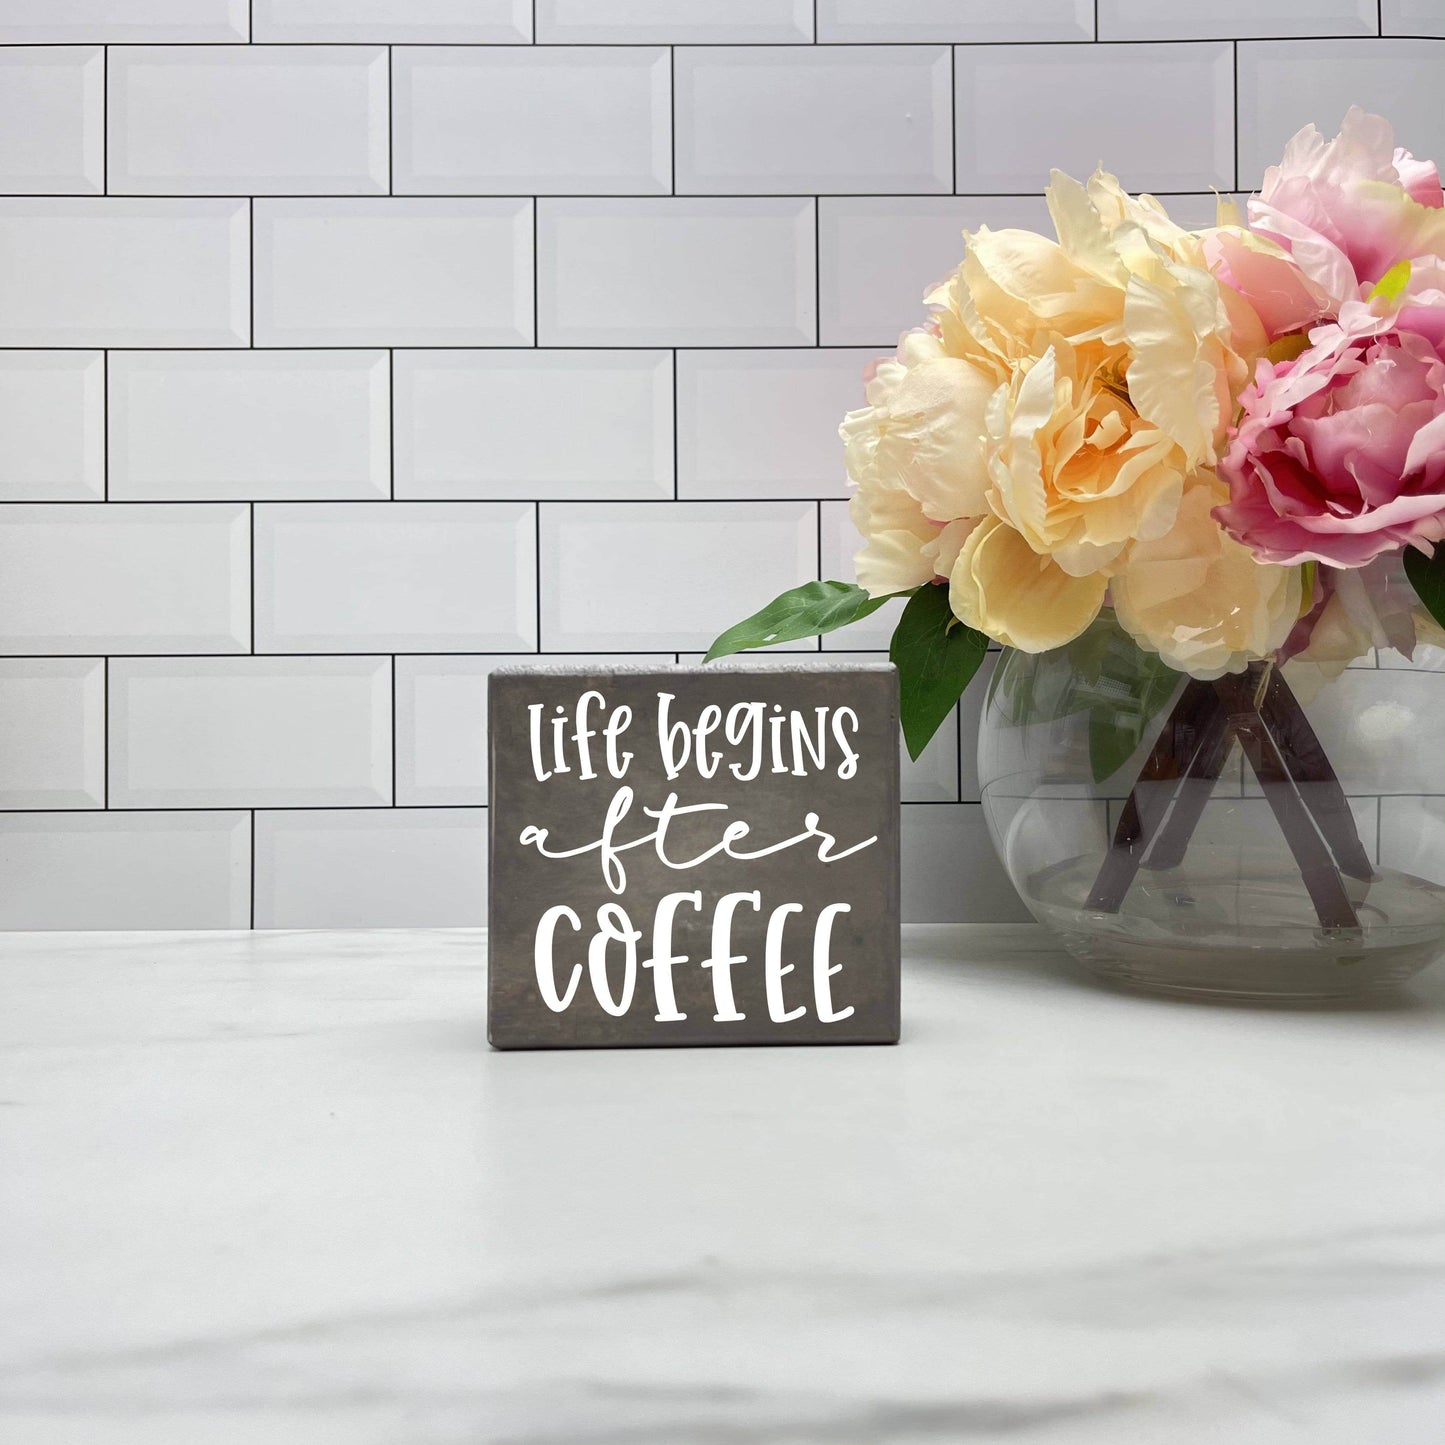 Life Begins after Coffee, kitchen wood sign, kitchen decor, home decor